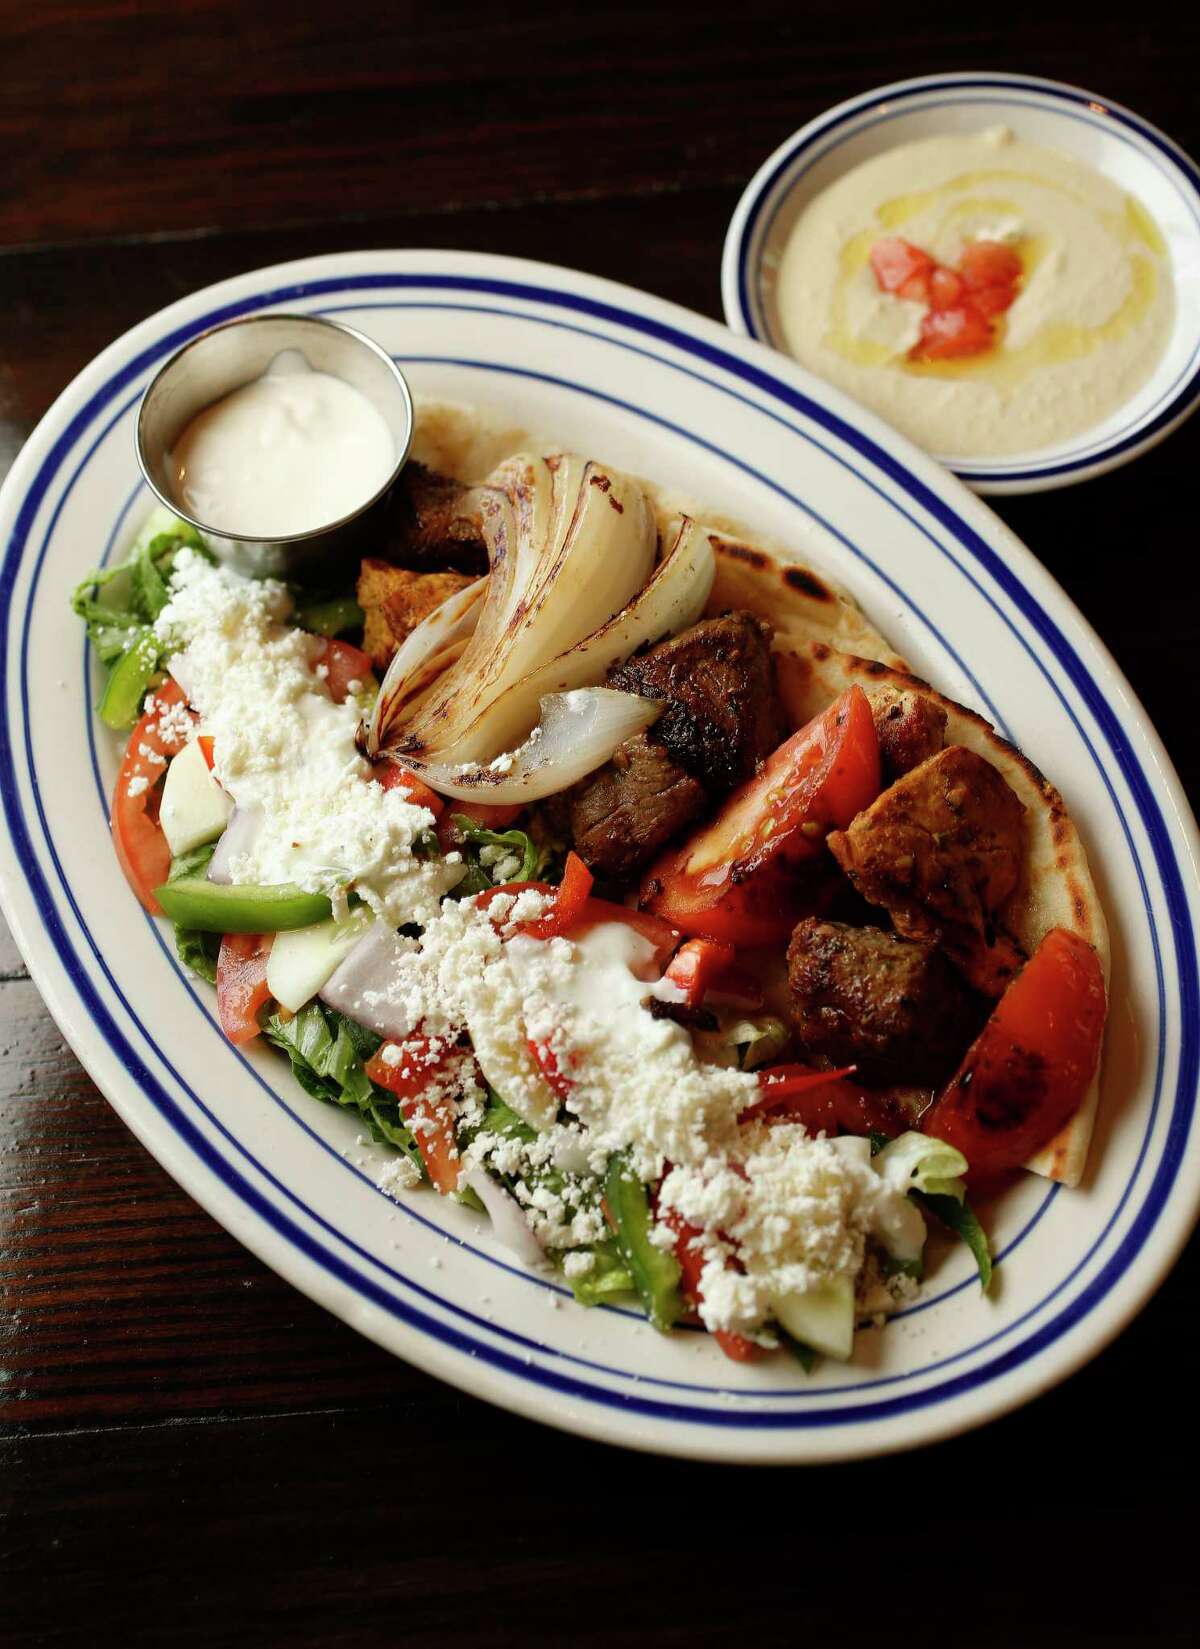 Island Grill offers the Kabob Plate - chicken breast and certified Angus beef with a side of hummus.